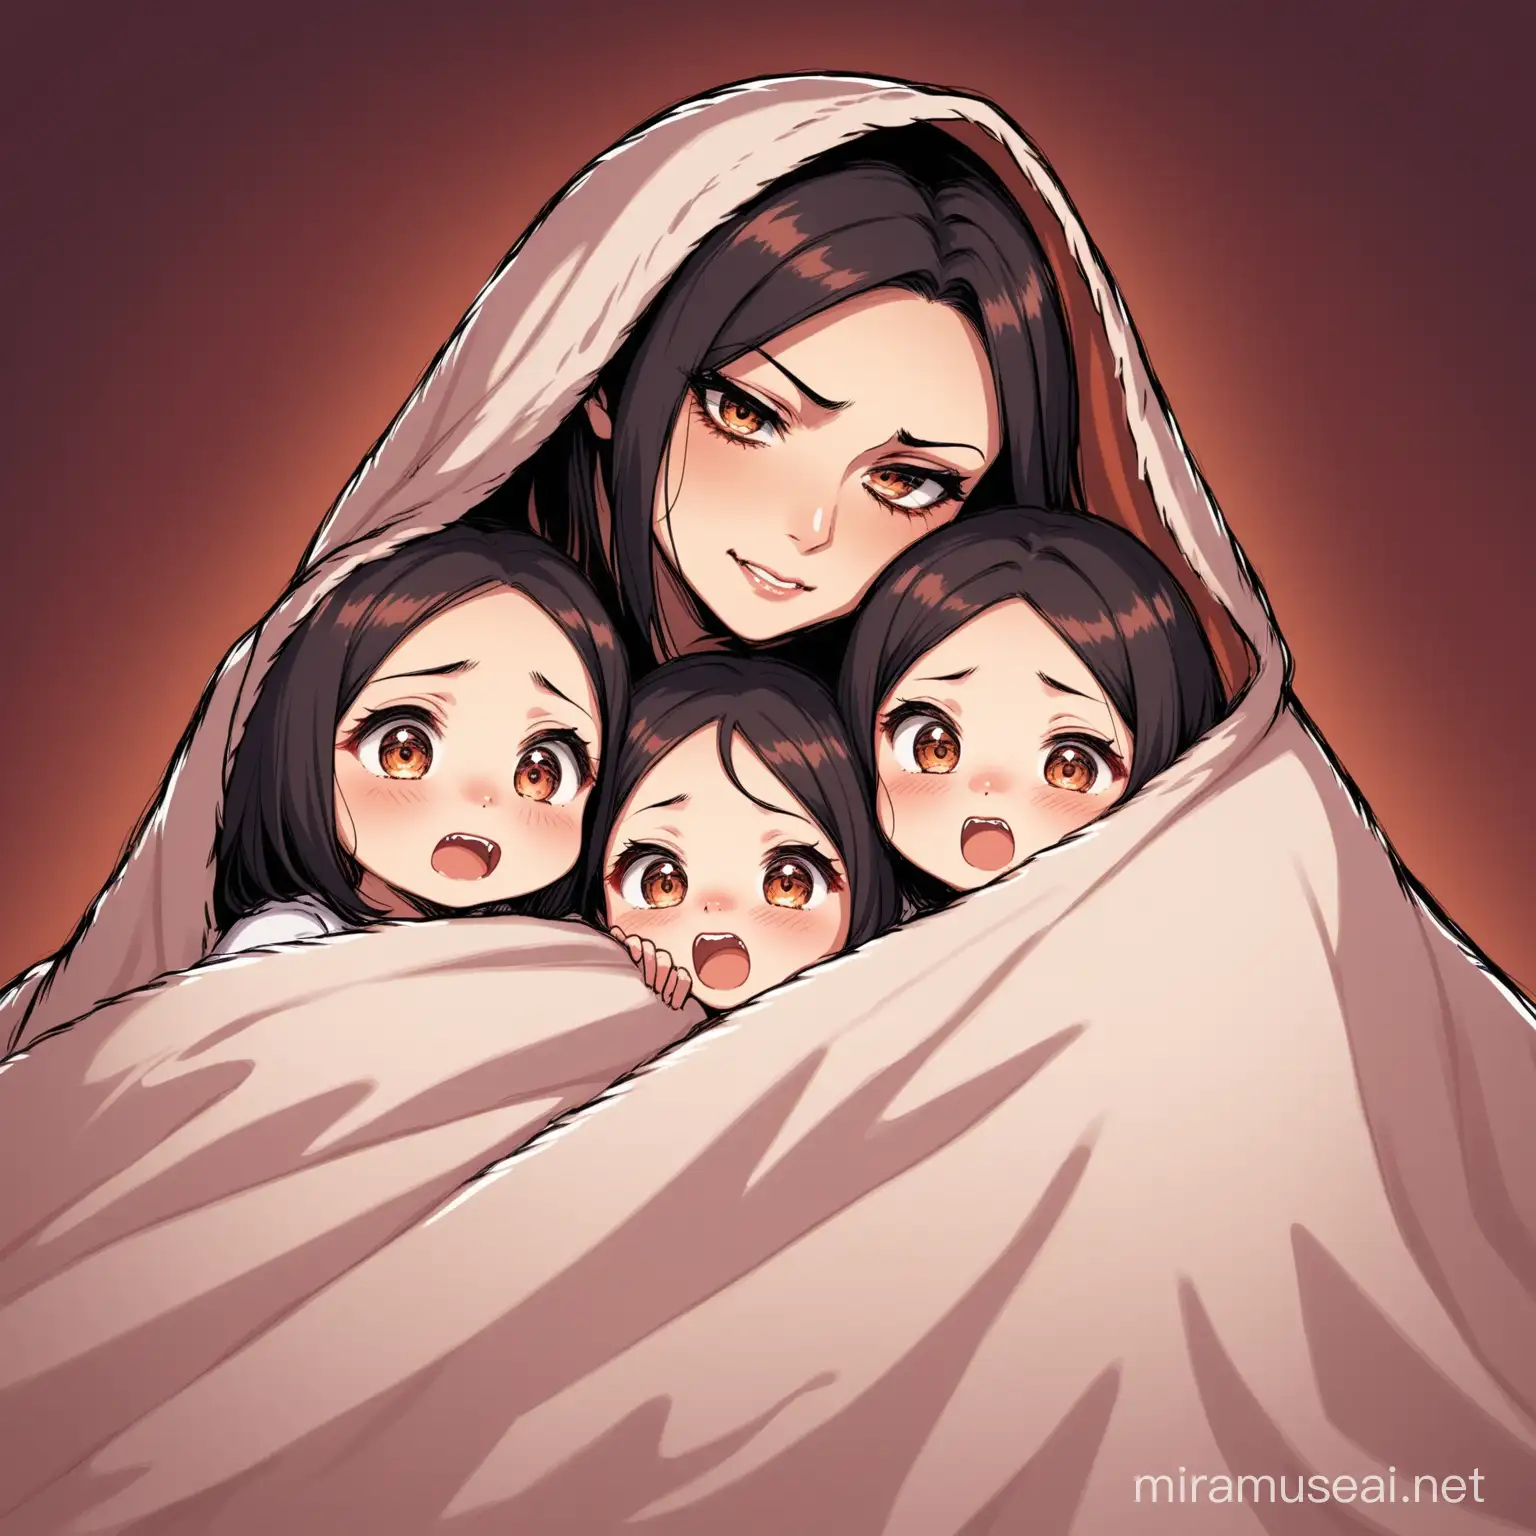 A cozy mom cuddling with her two demented, maniacal young daughters under blankets